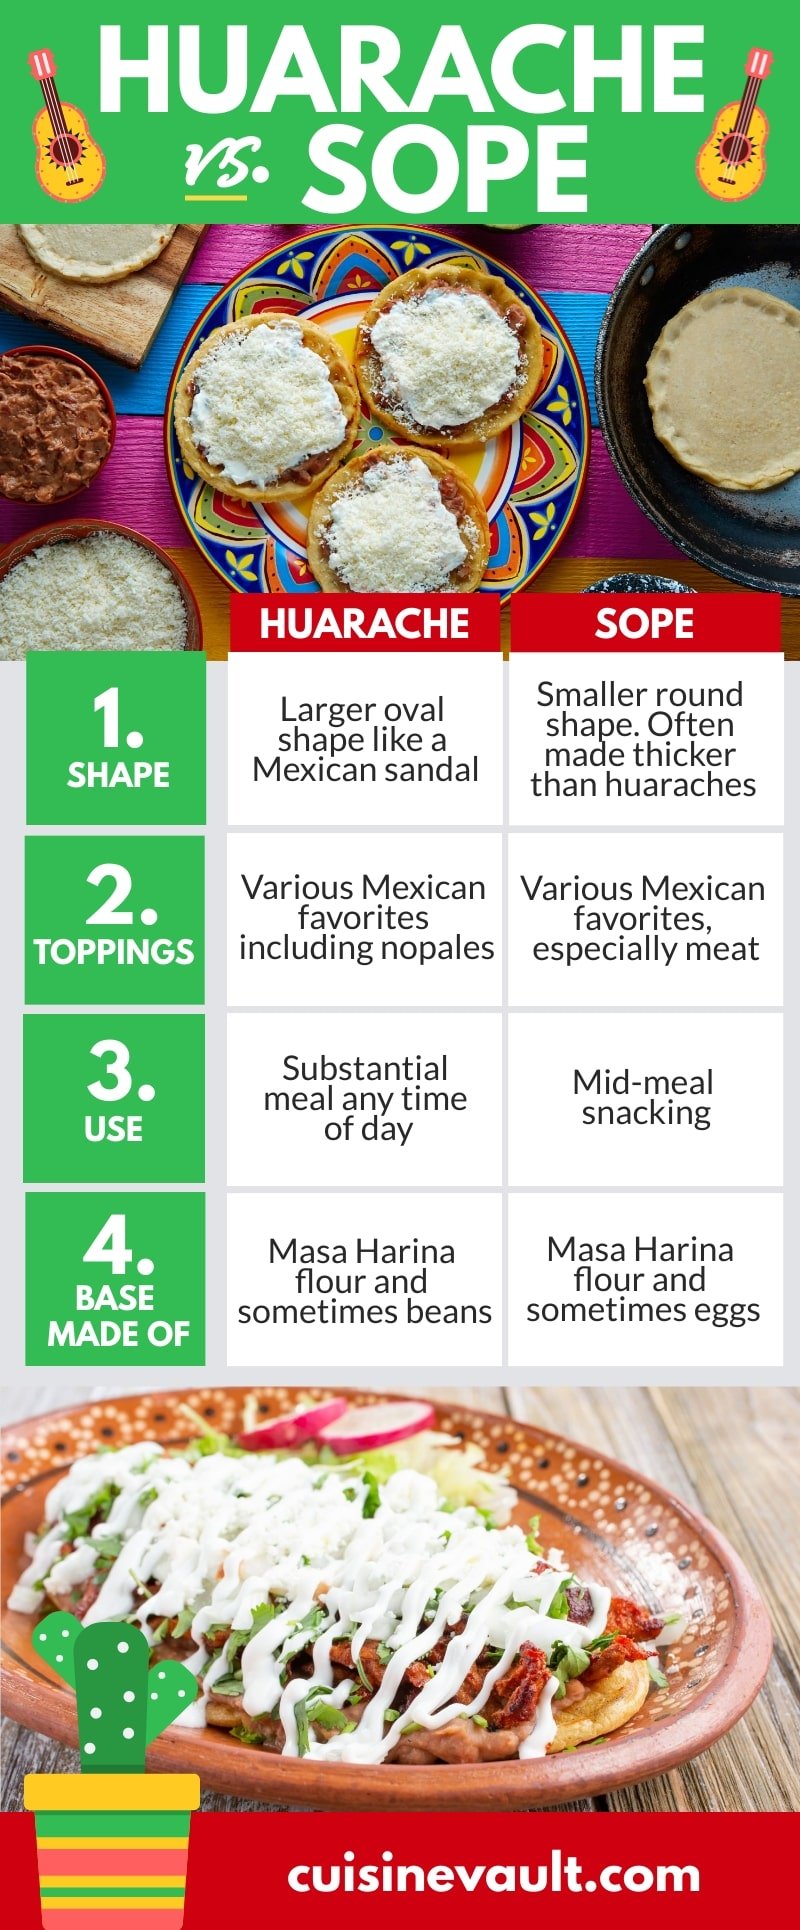 An infographic comparing the sope and huarache